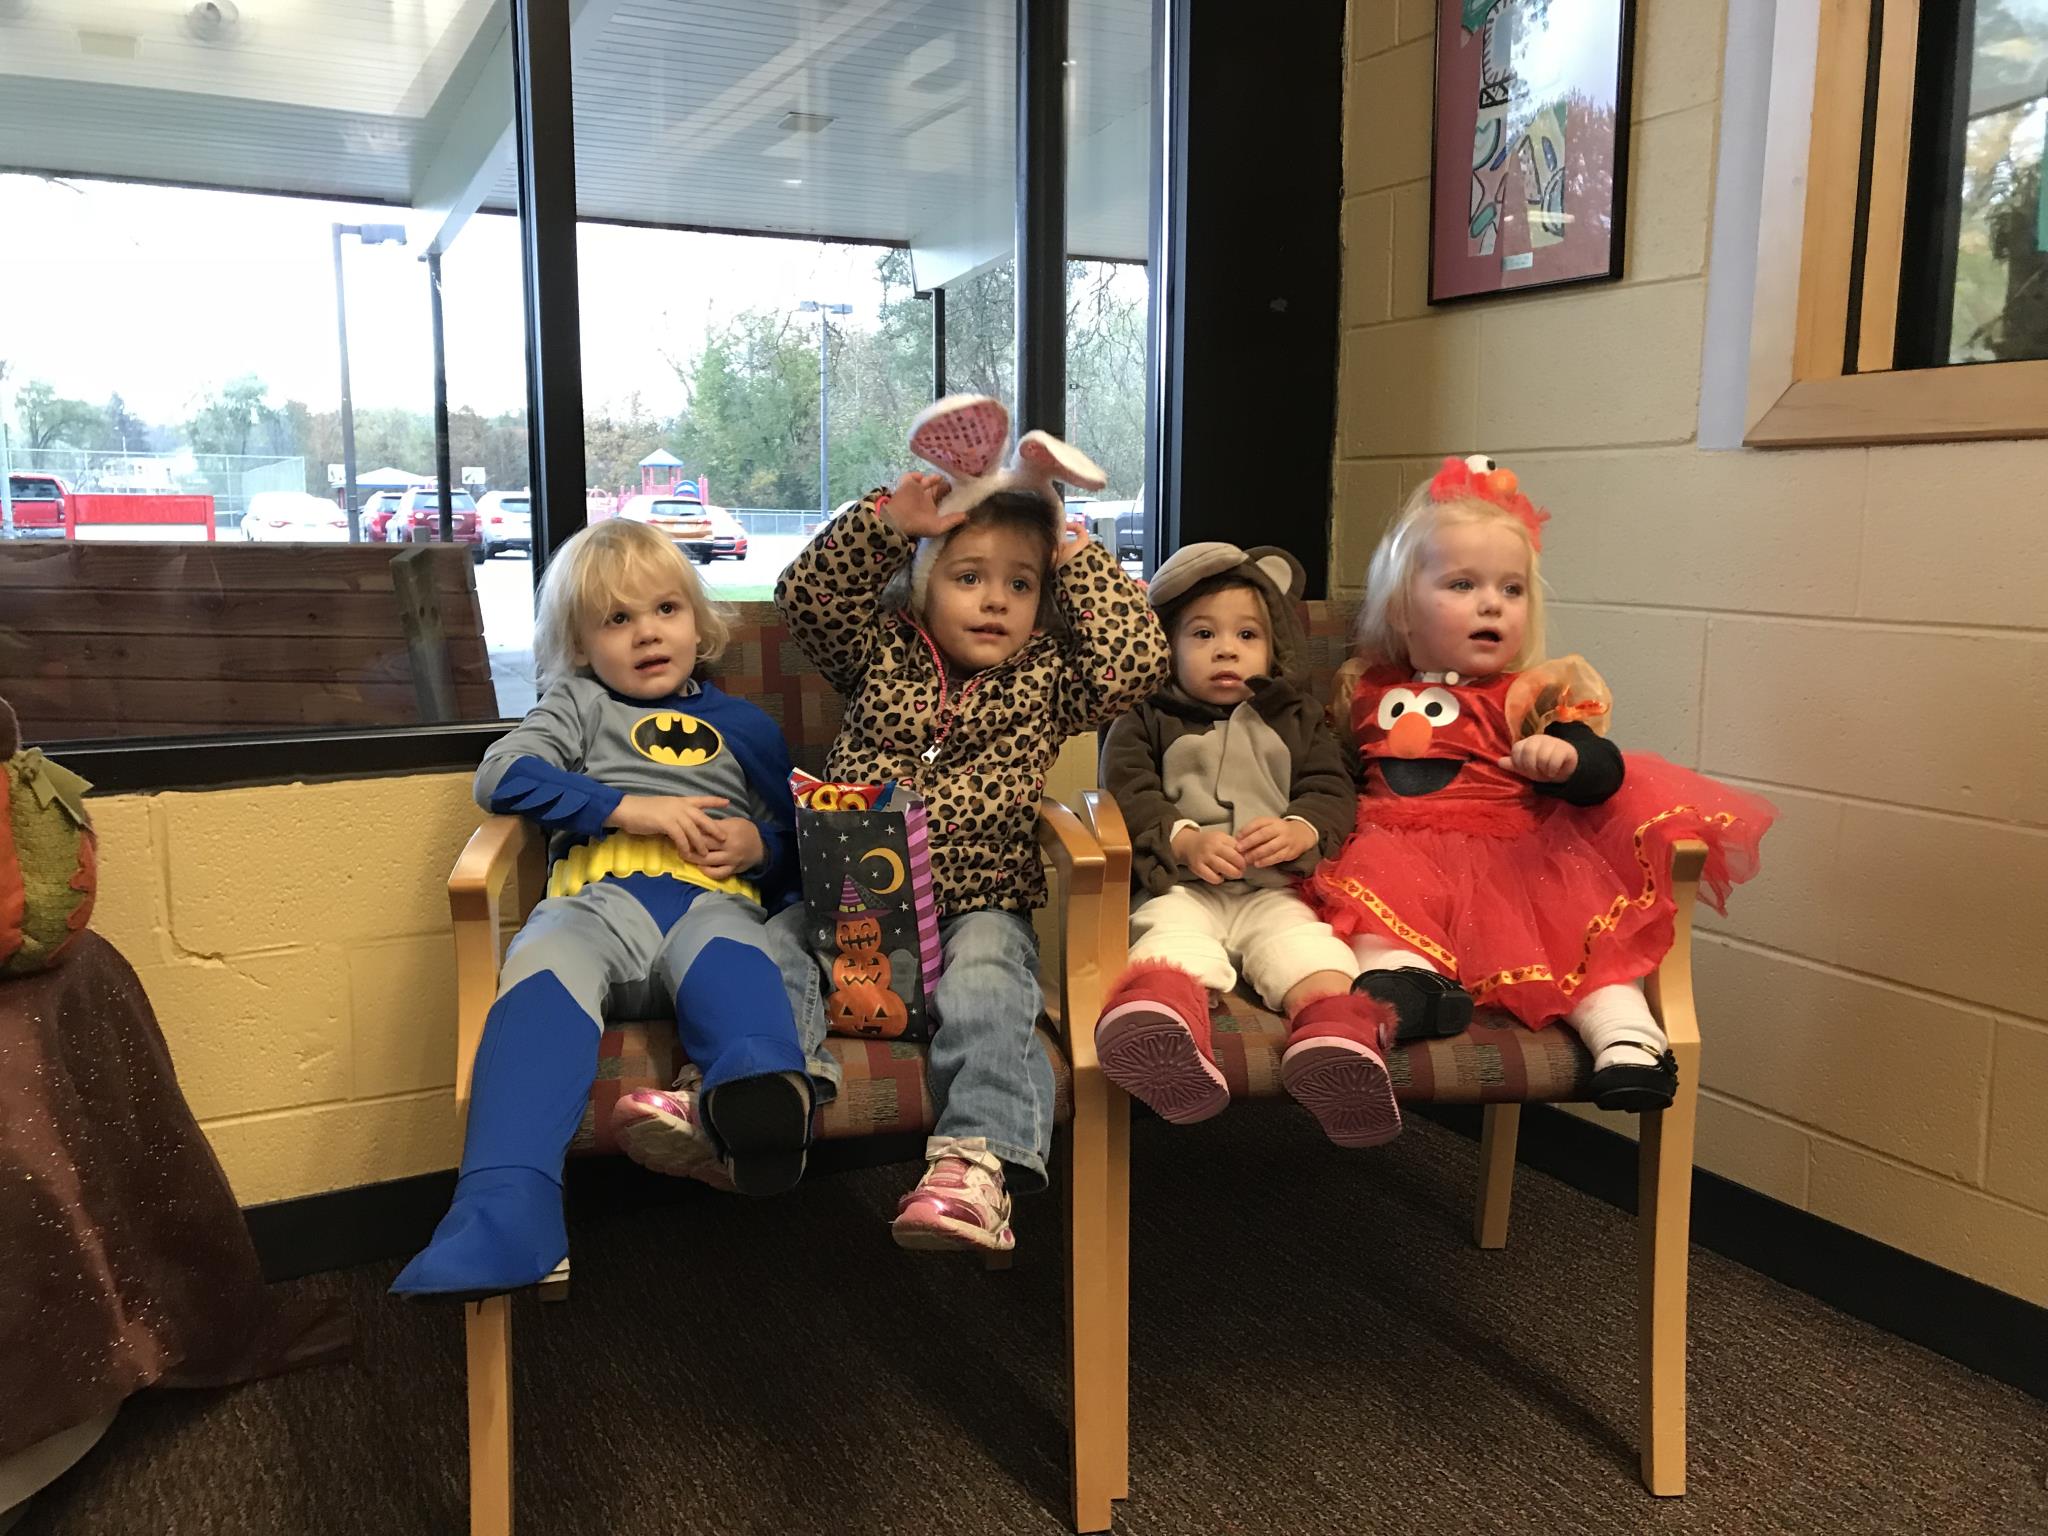 Early On students in costume - batman, a bunny, a monkey, elmo